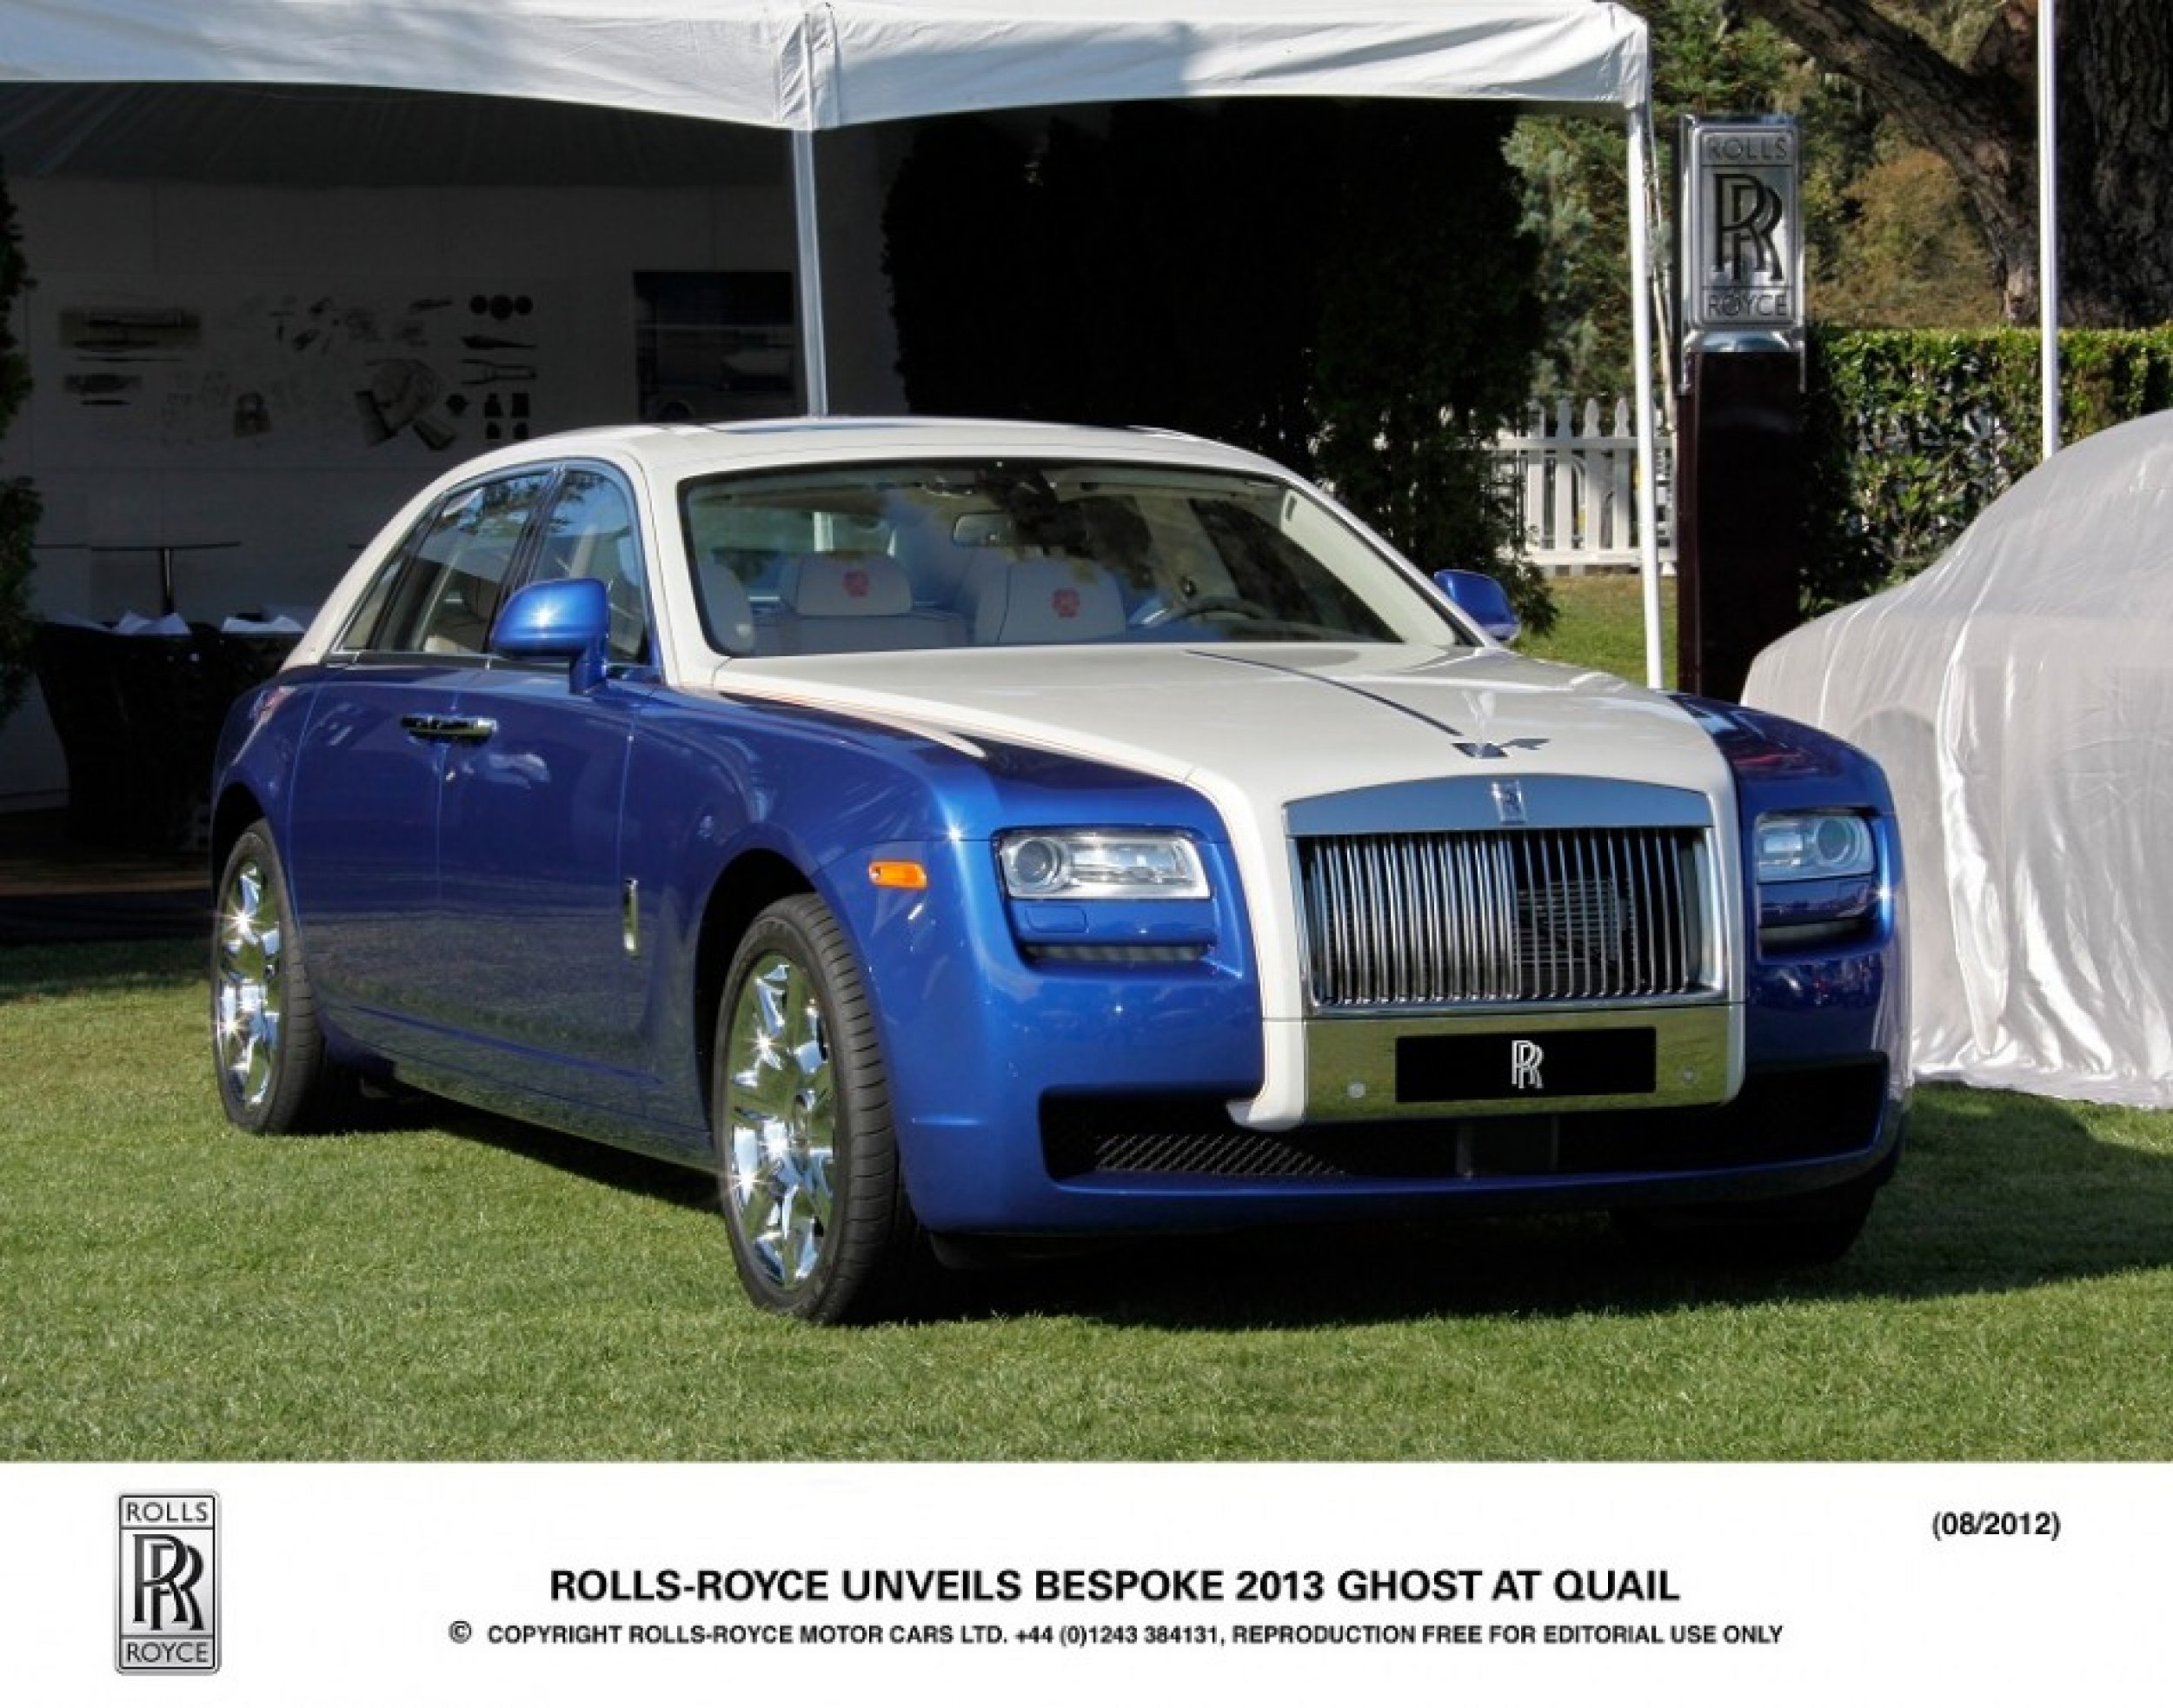 The new 2013 Rolls-Royce Ghost parked at Pebble Beach.